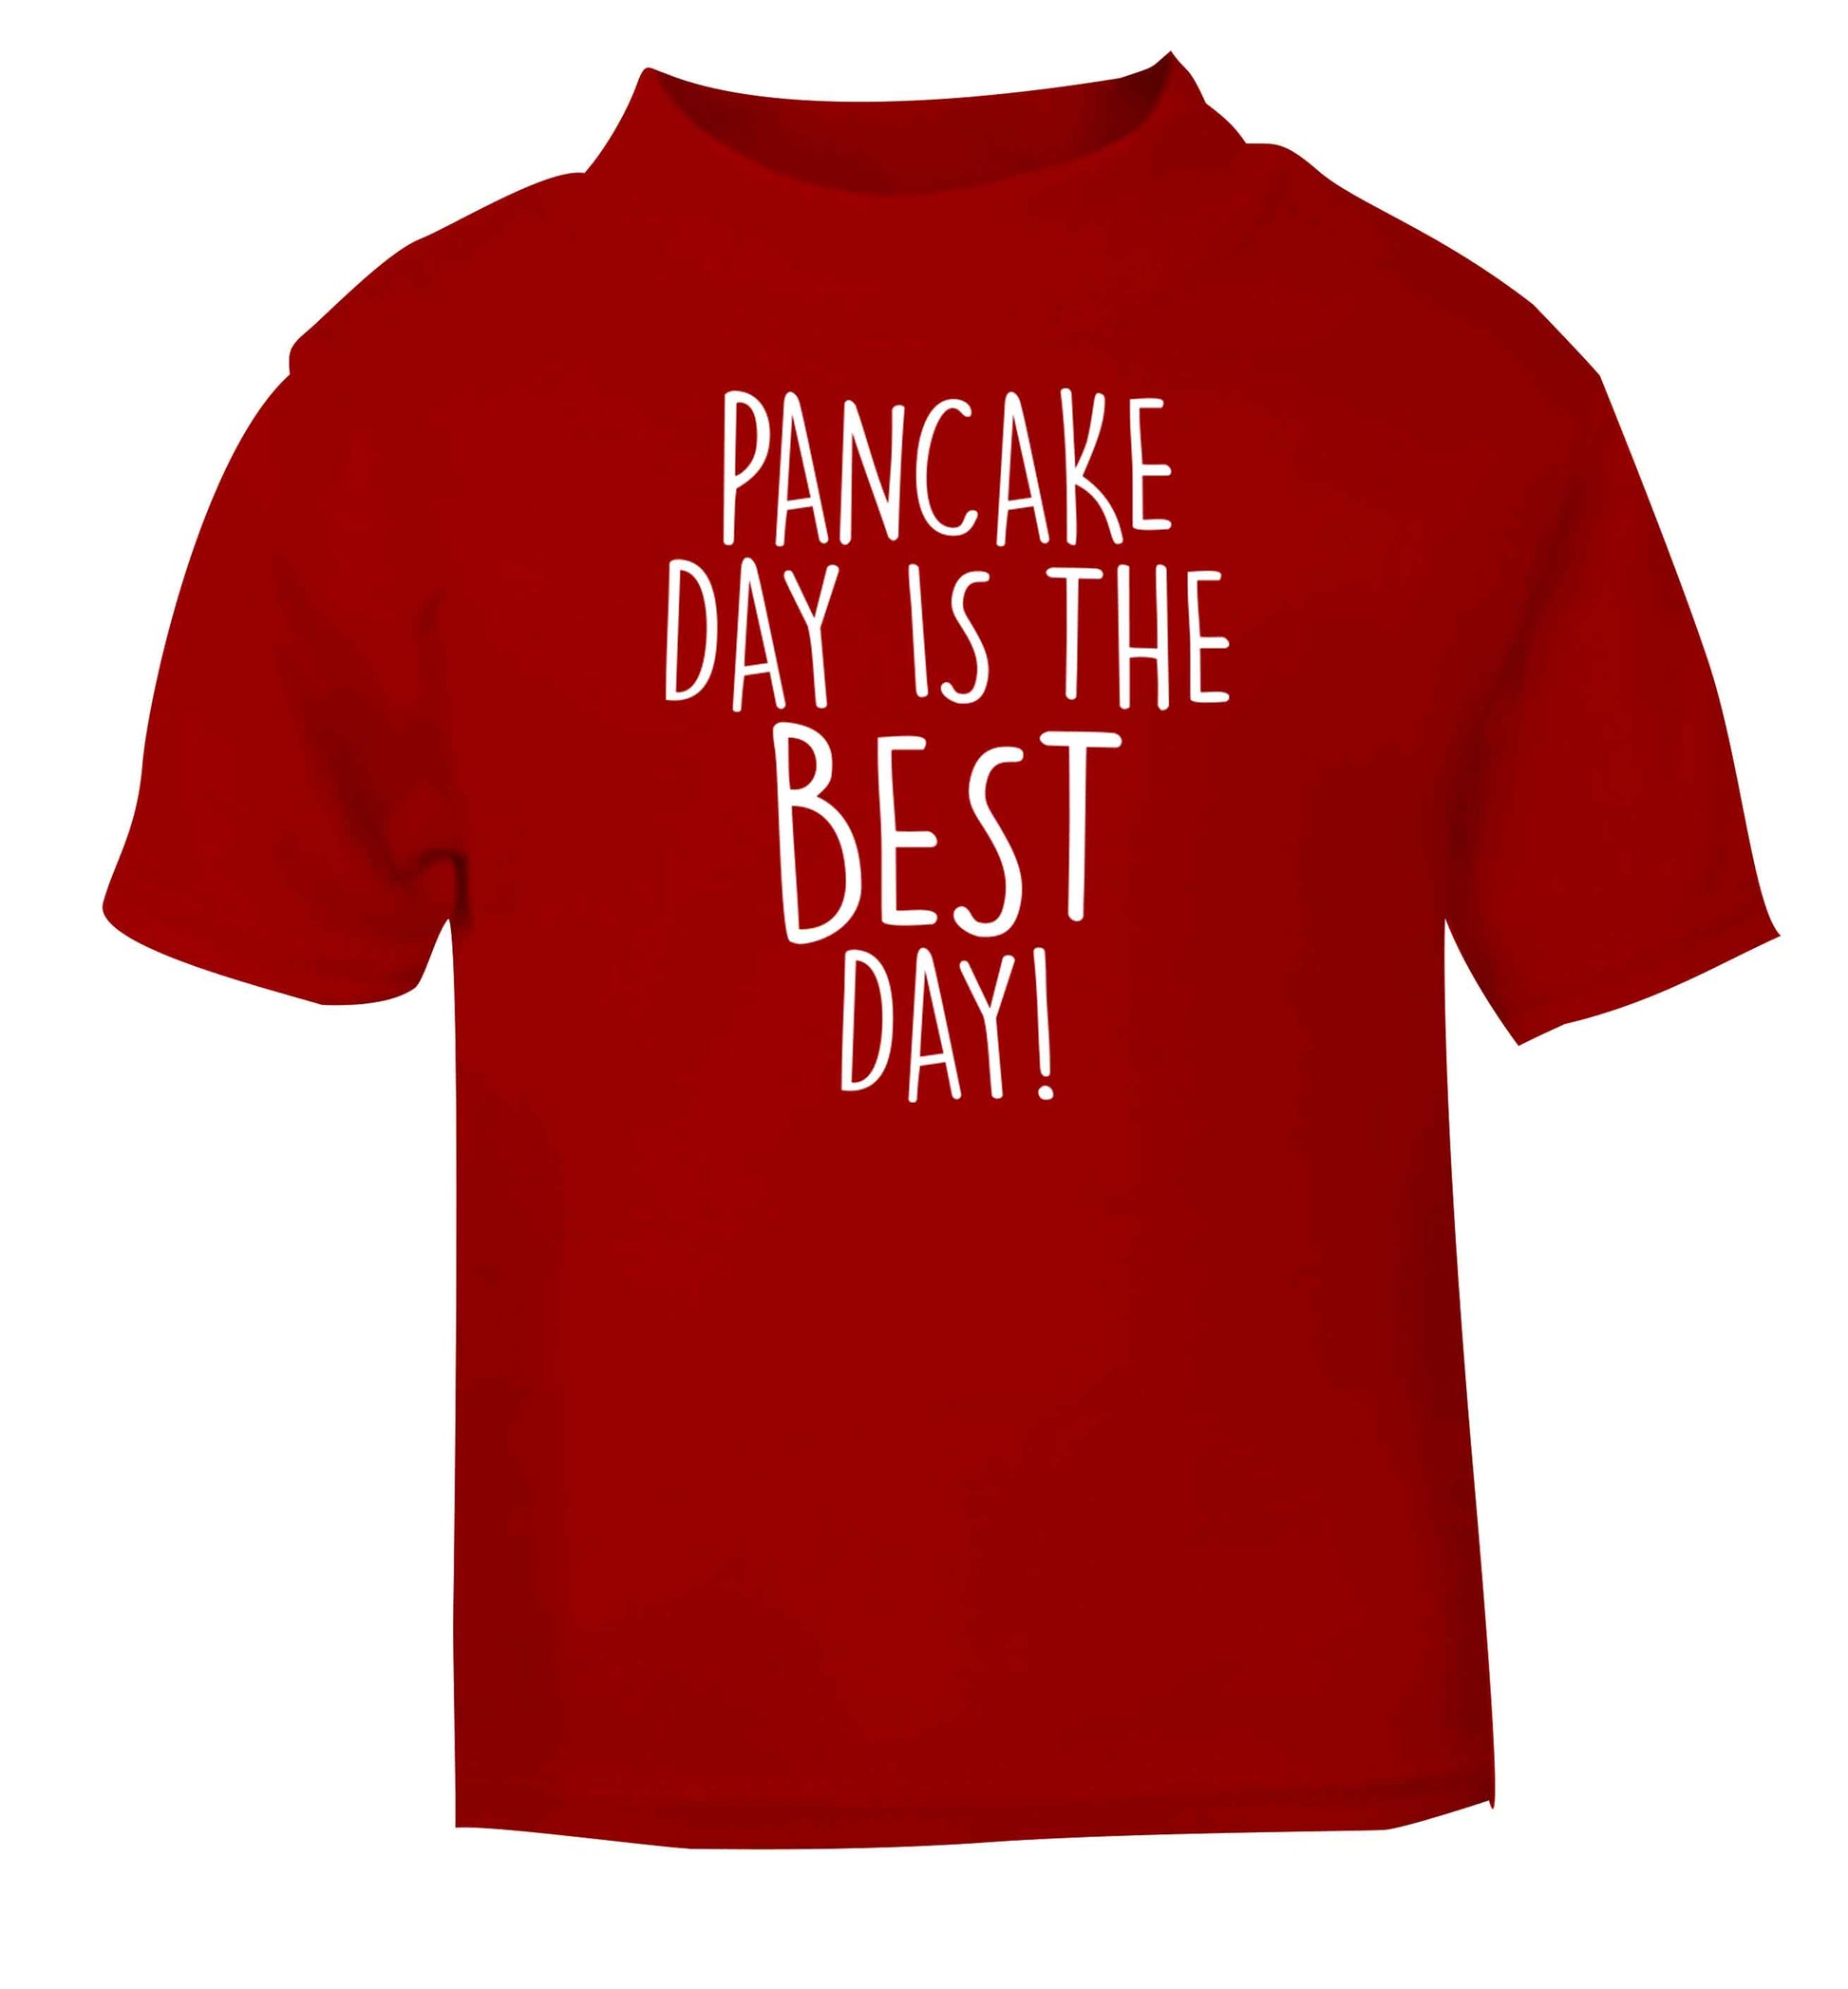 Pancake day is the best day red baby toddler Tshirt 2 Years